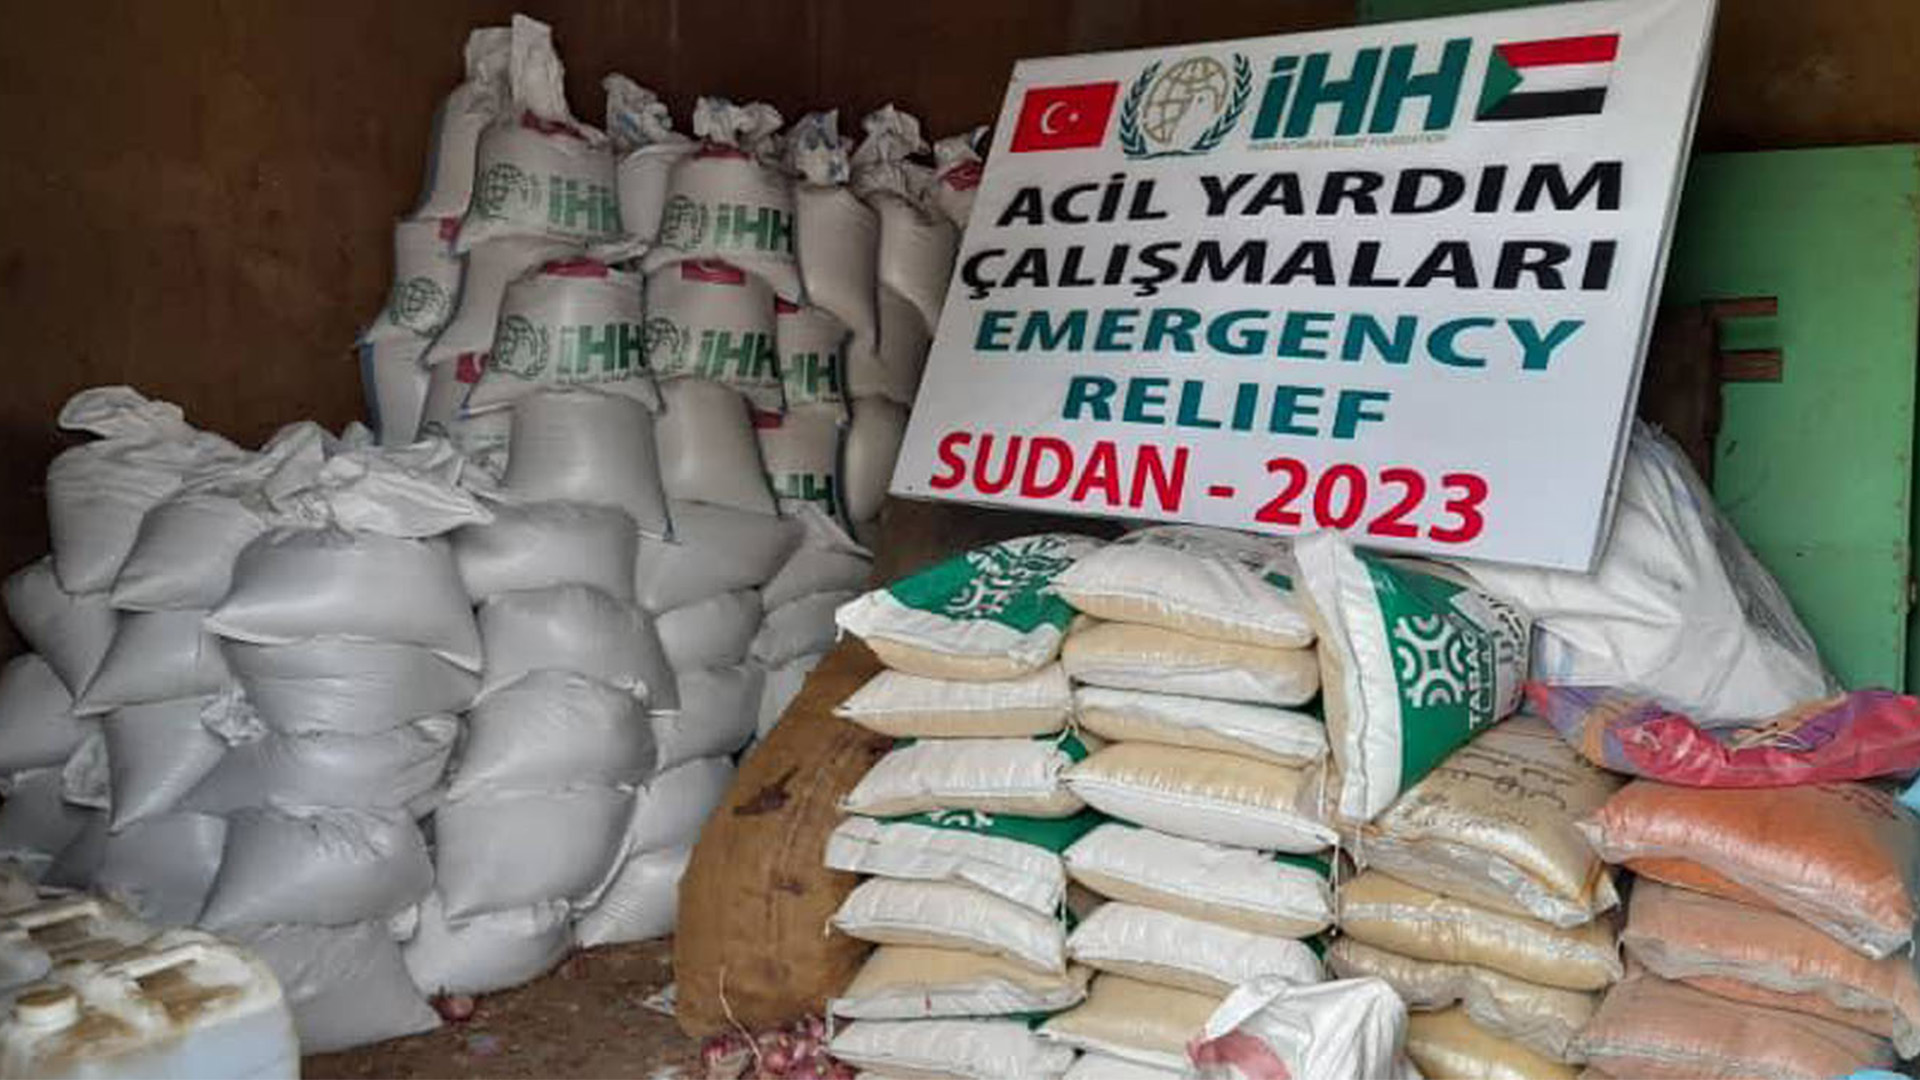 Humanitarian aid from IHH to the people of Sudan who migrated to Chad